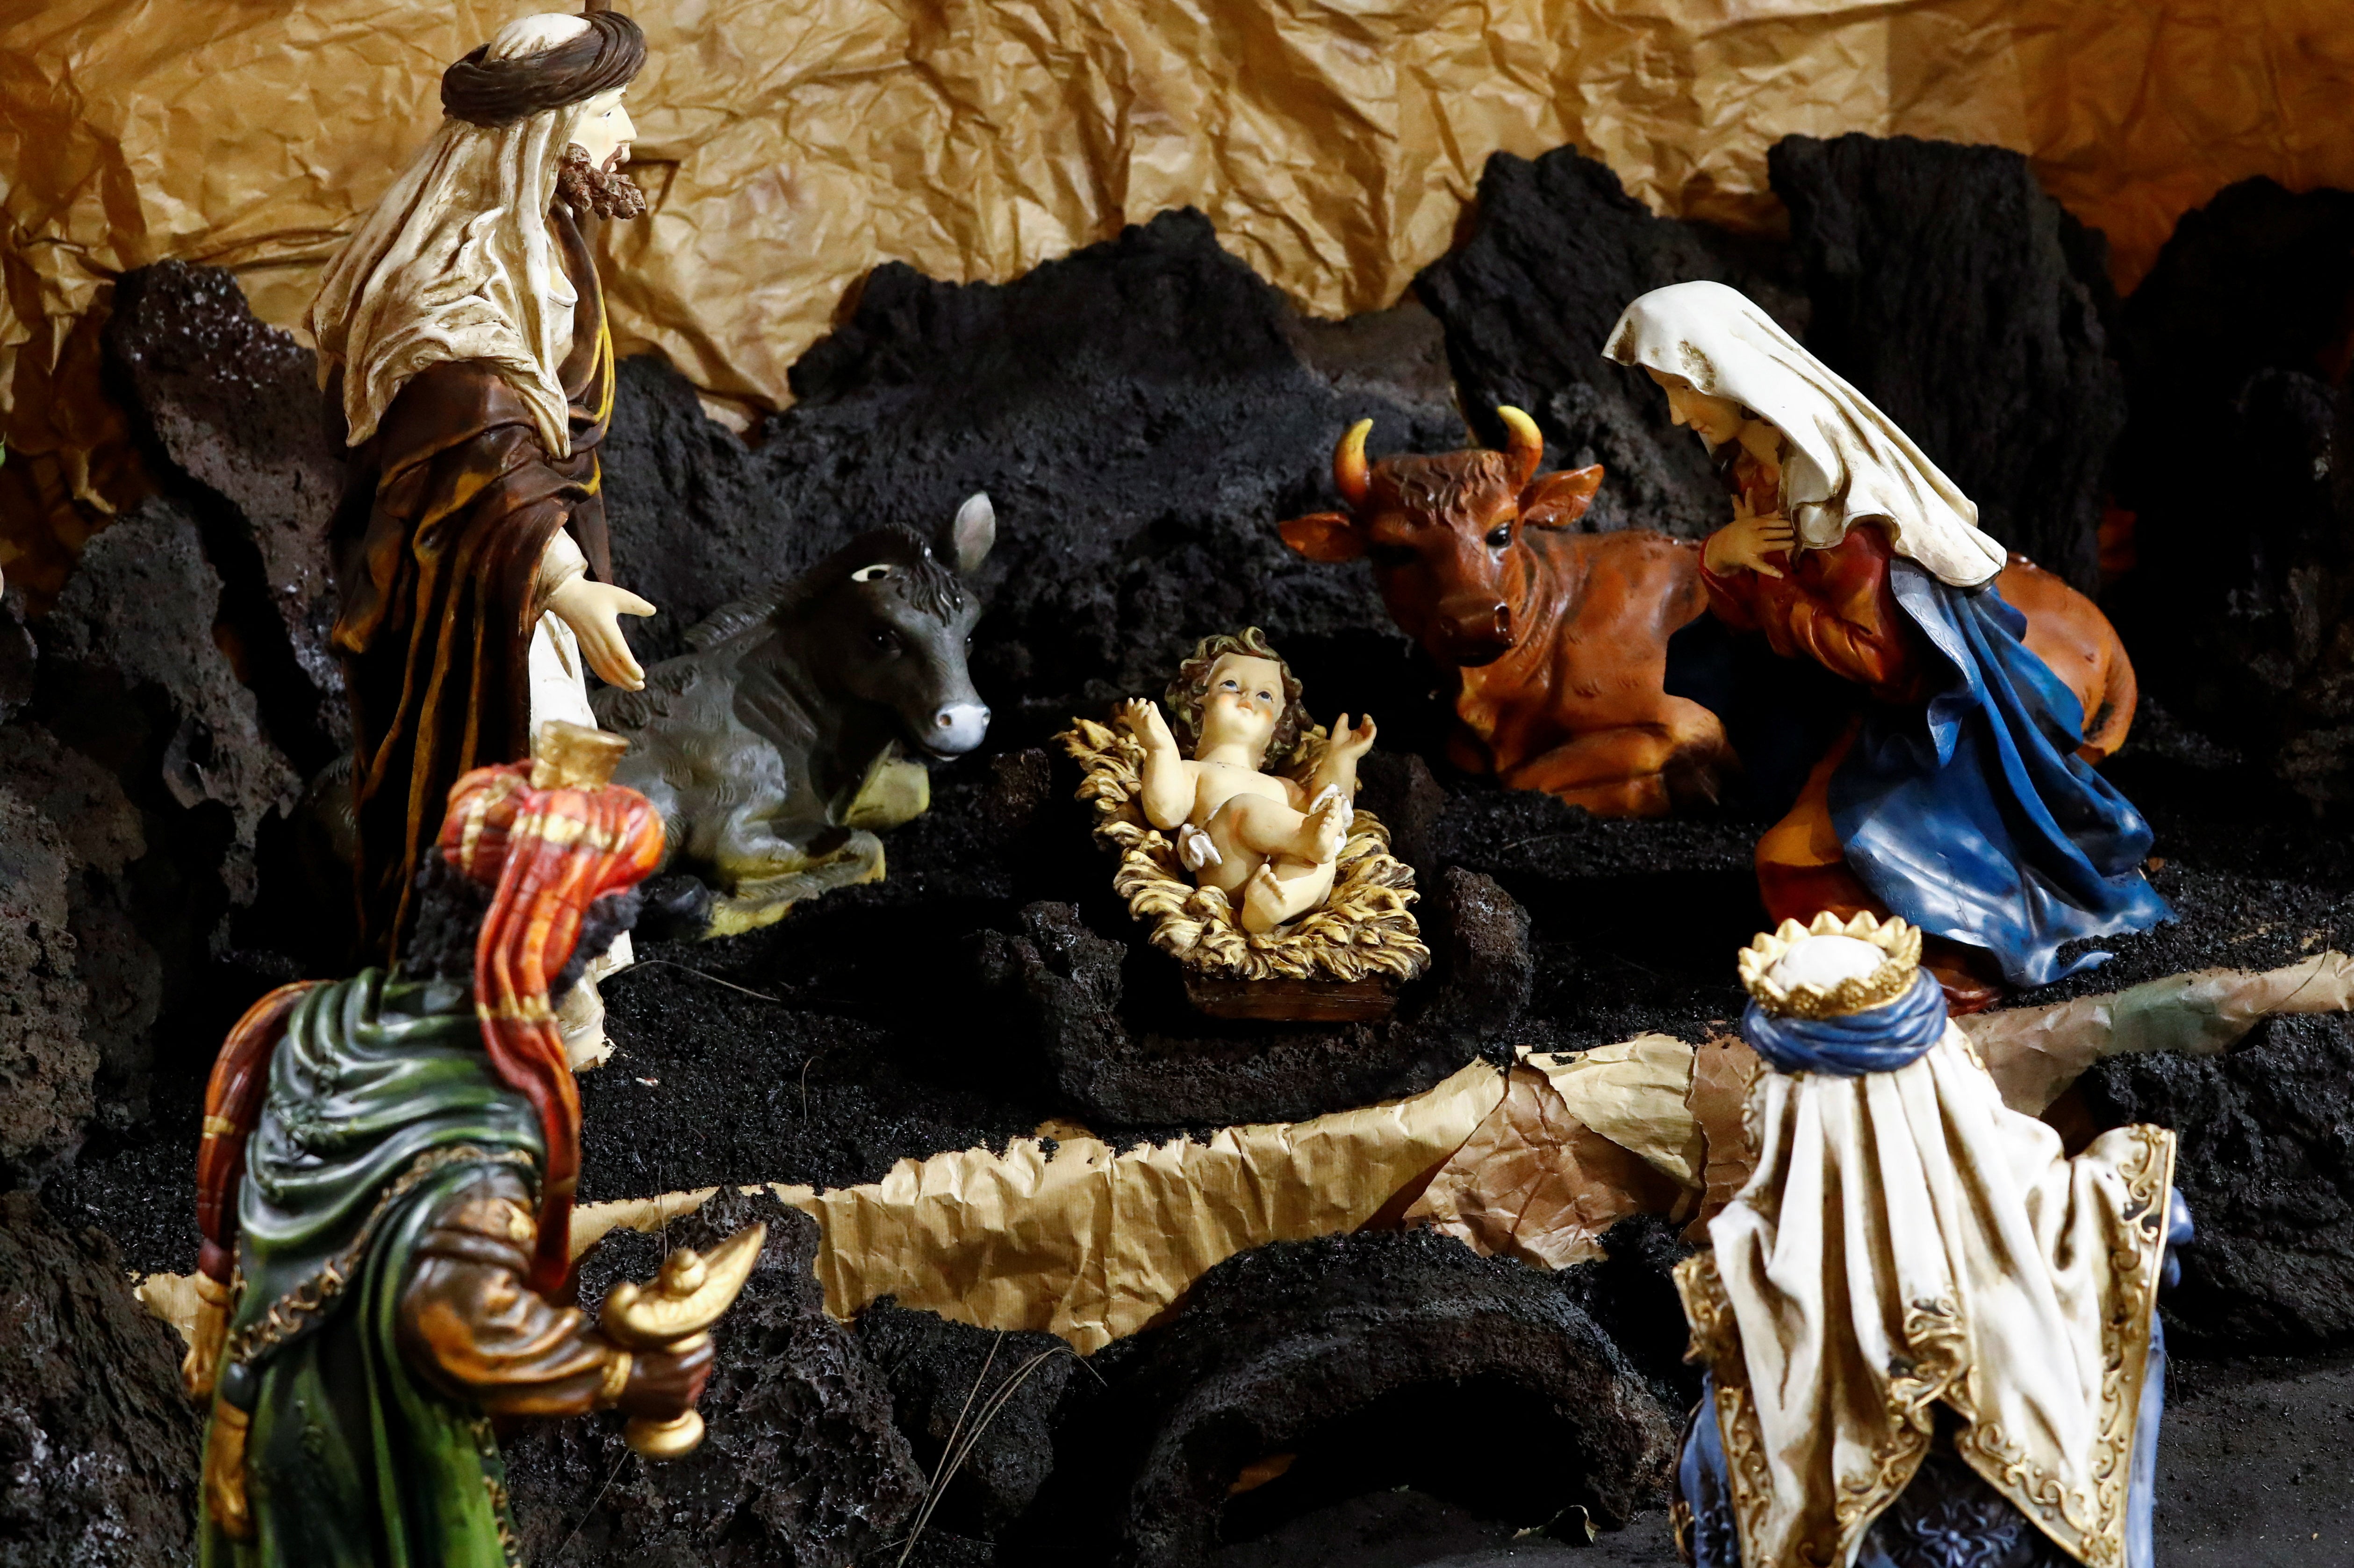 The nativity scene is being housed in a nearby church